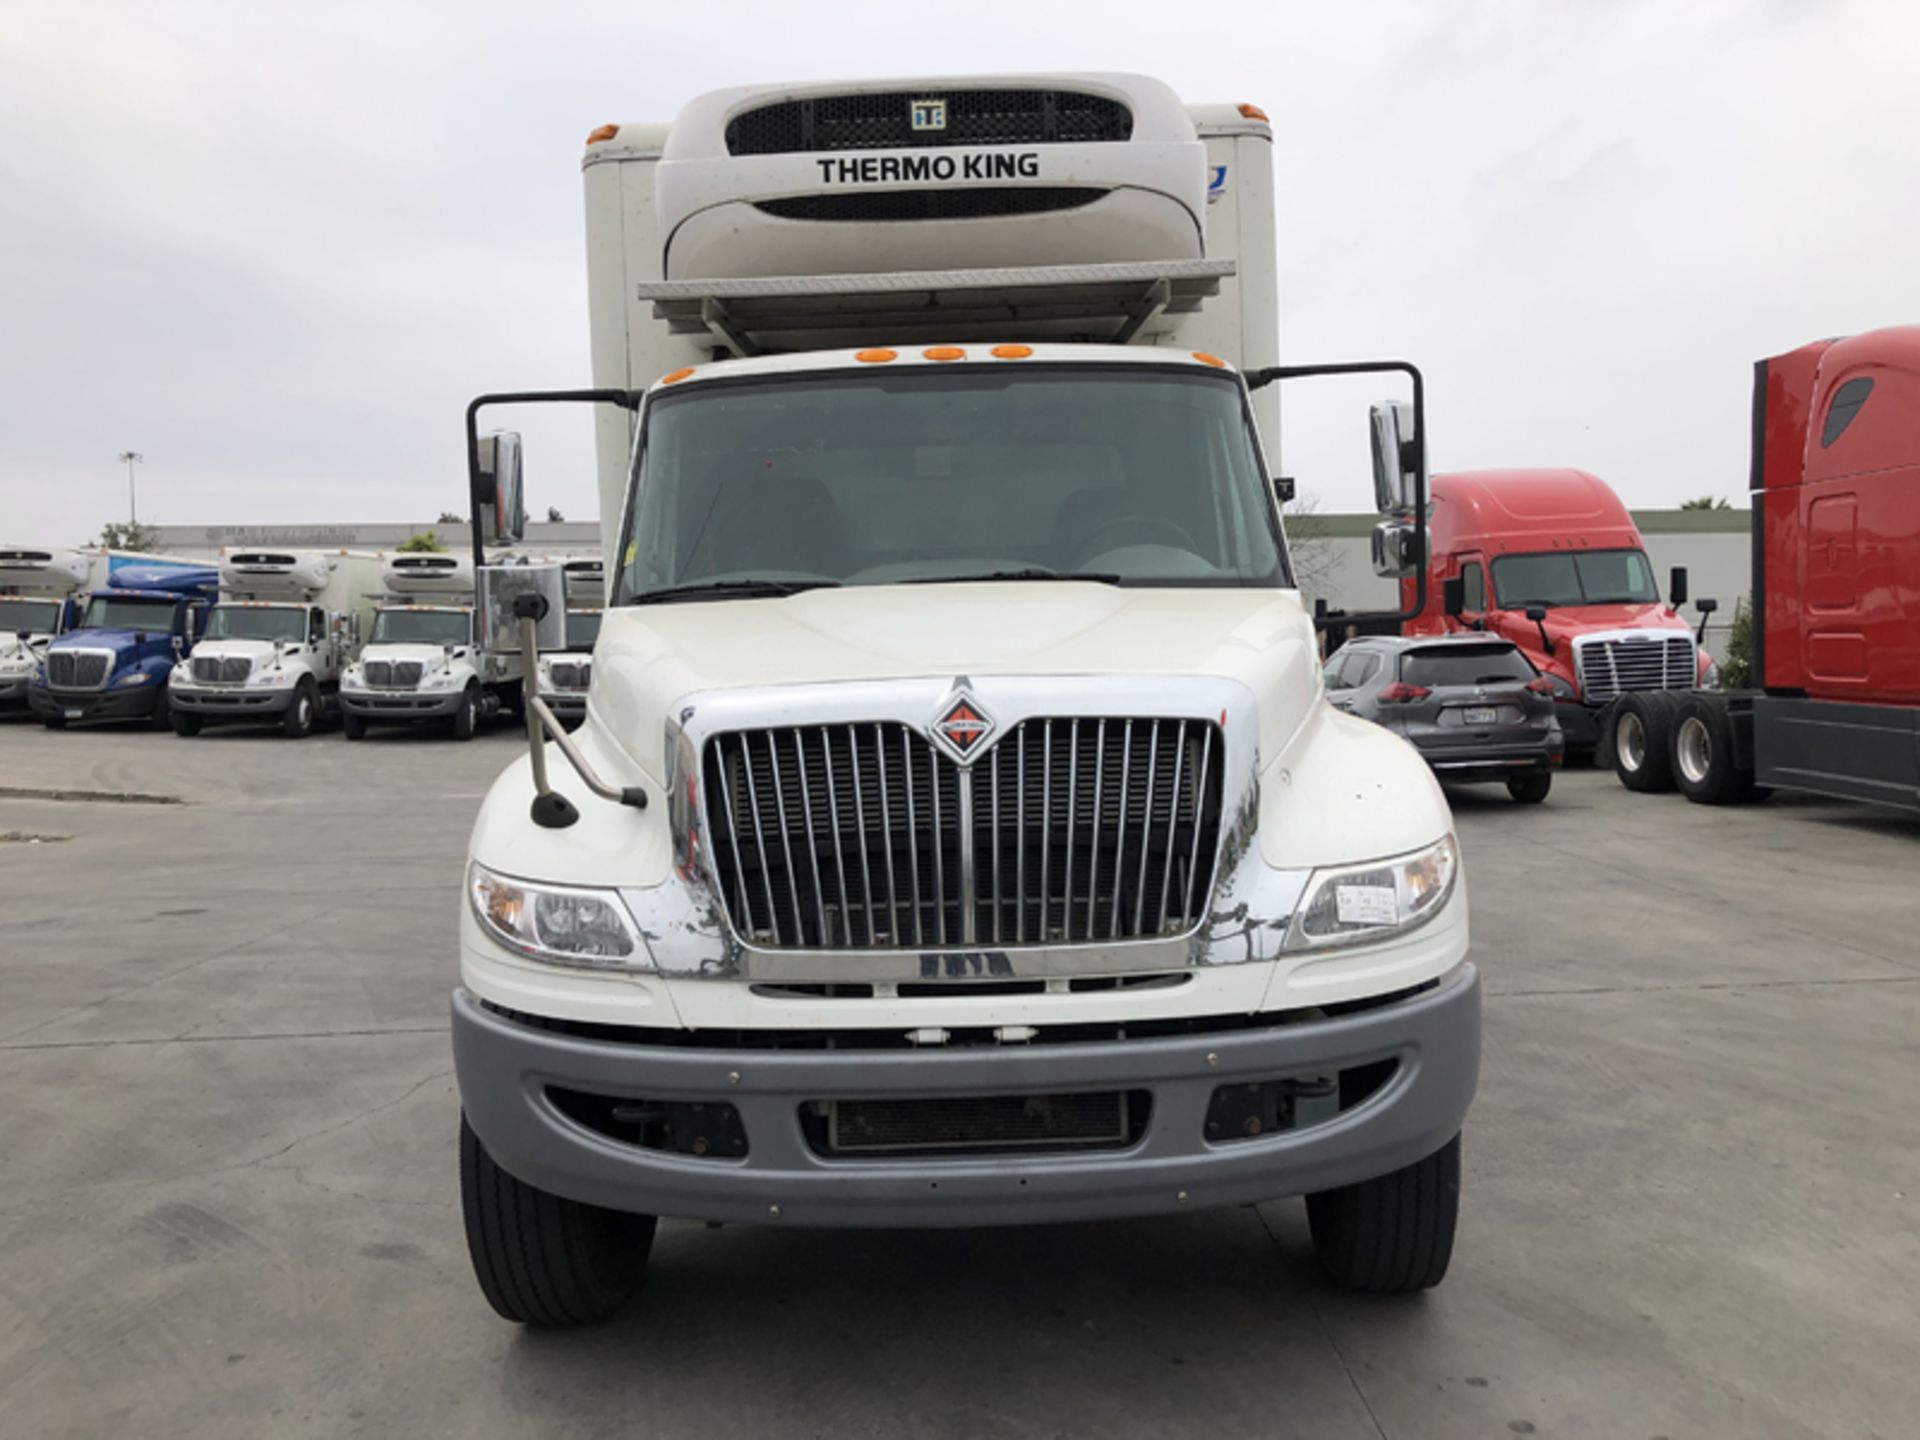 2018 INTERNATIONAL 4400 SBA 6X4 REFRIGERATED BOX TRUCK VIN#: 1HTMSTAR0JH529609, Approx Miles: 65133, - Image 2 of 10